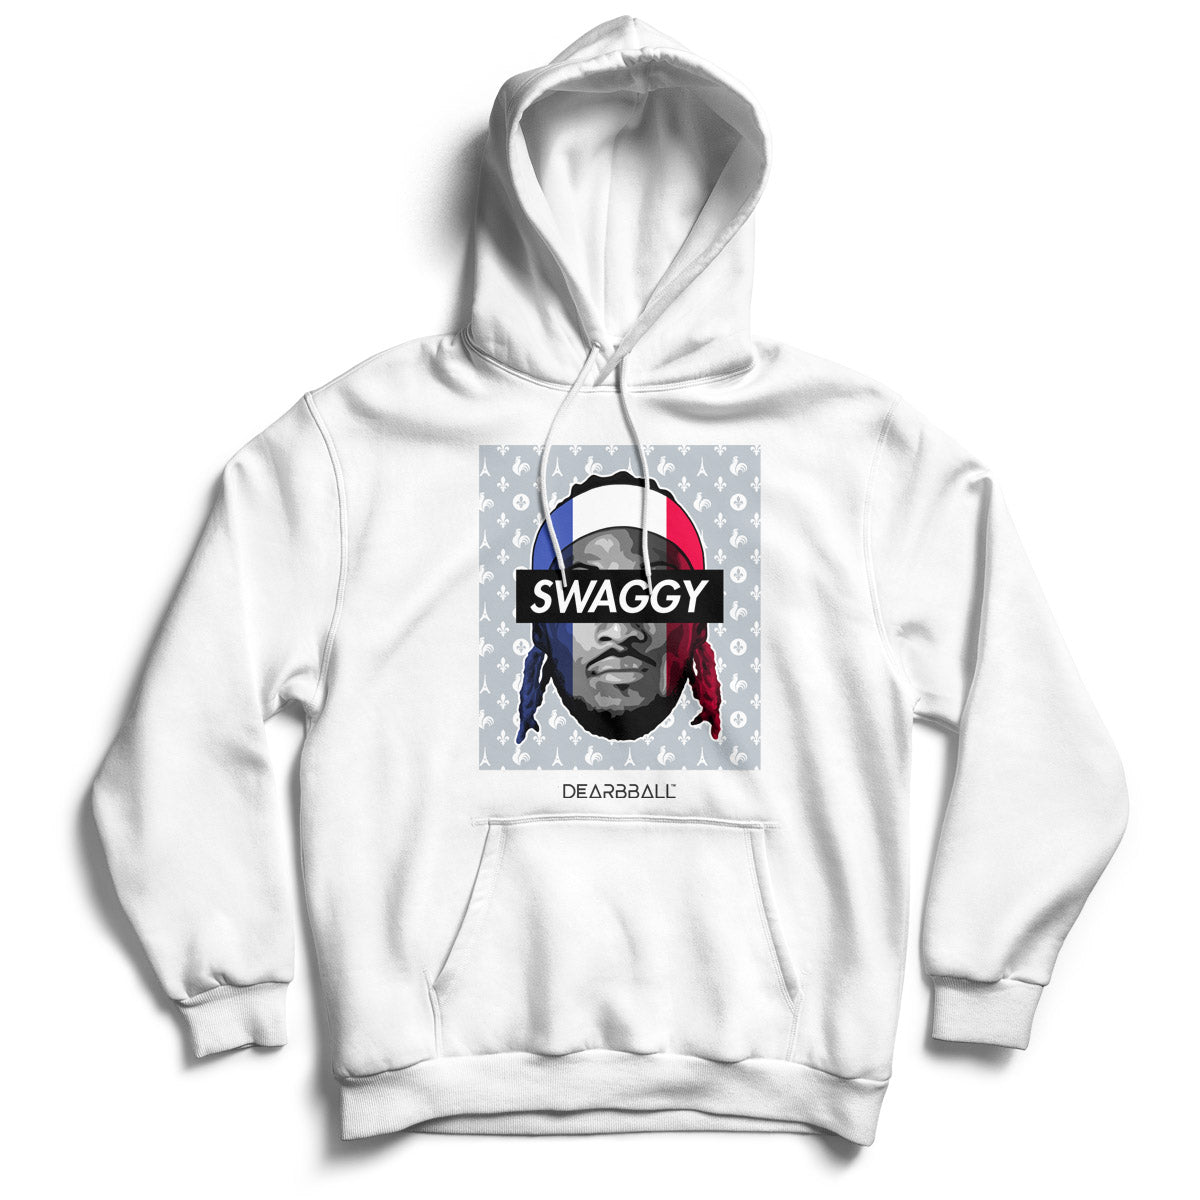 DearBBall Hooded Sweatshirt - SWAGGY France Royalty Edition